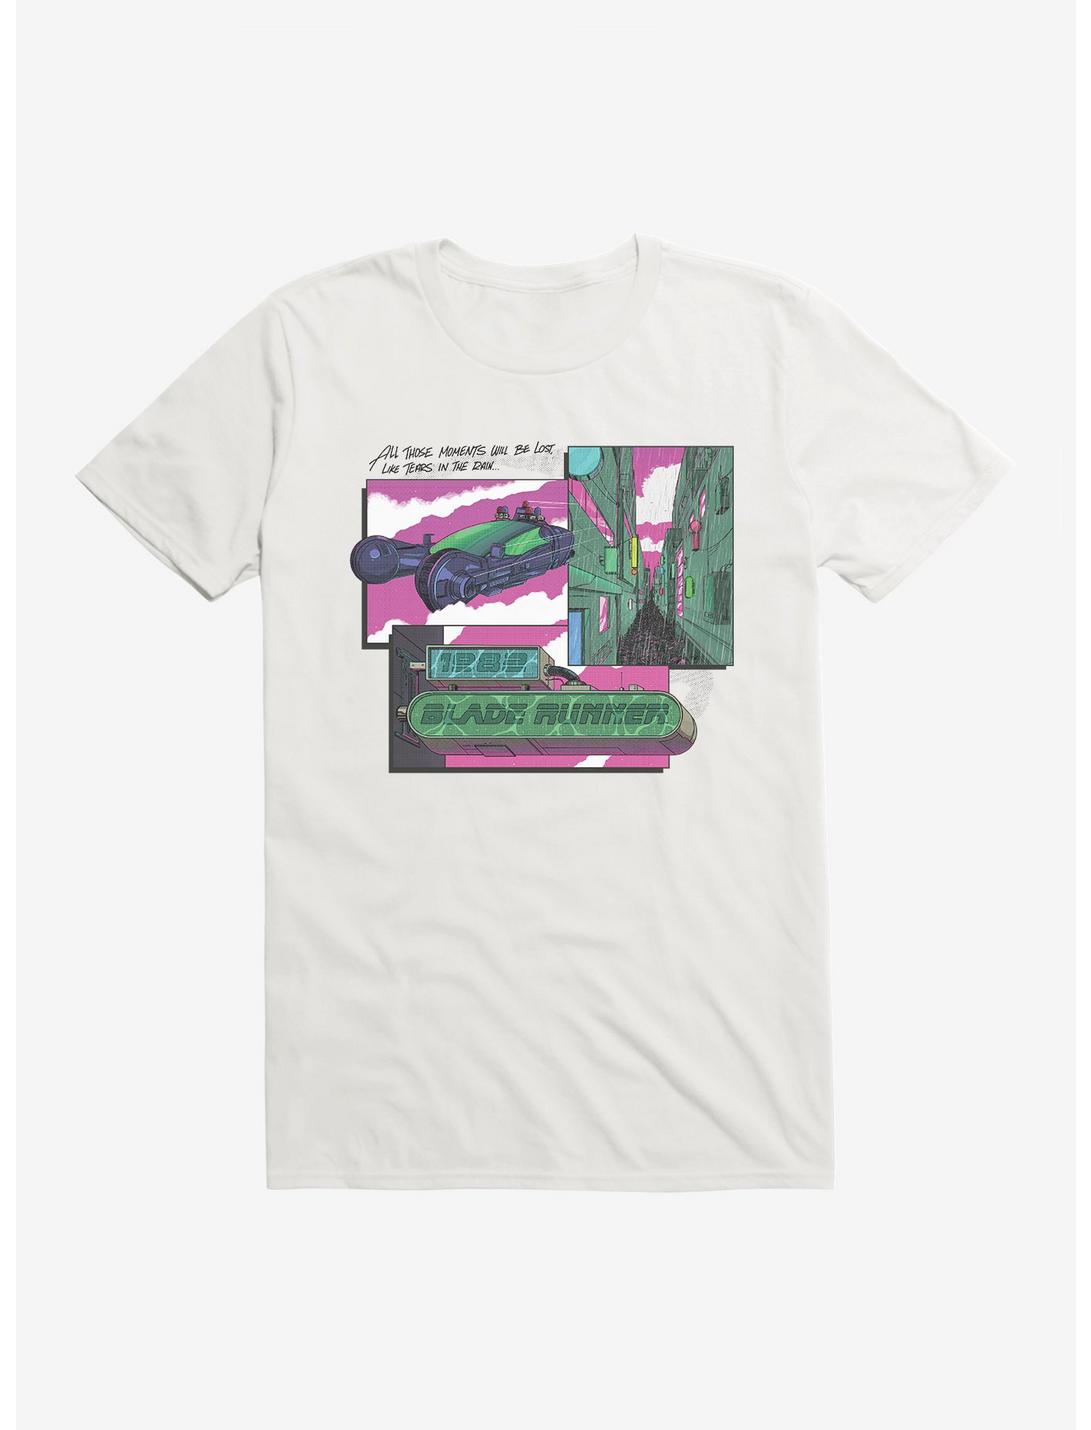 Blade Runner WB 100 All These Moments T-Shirt, WHITE, hi-res